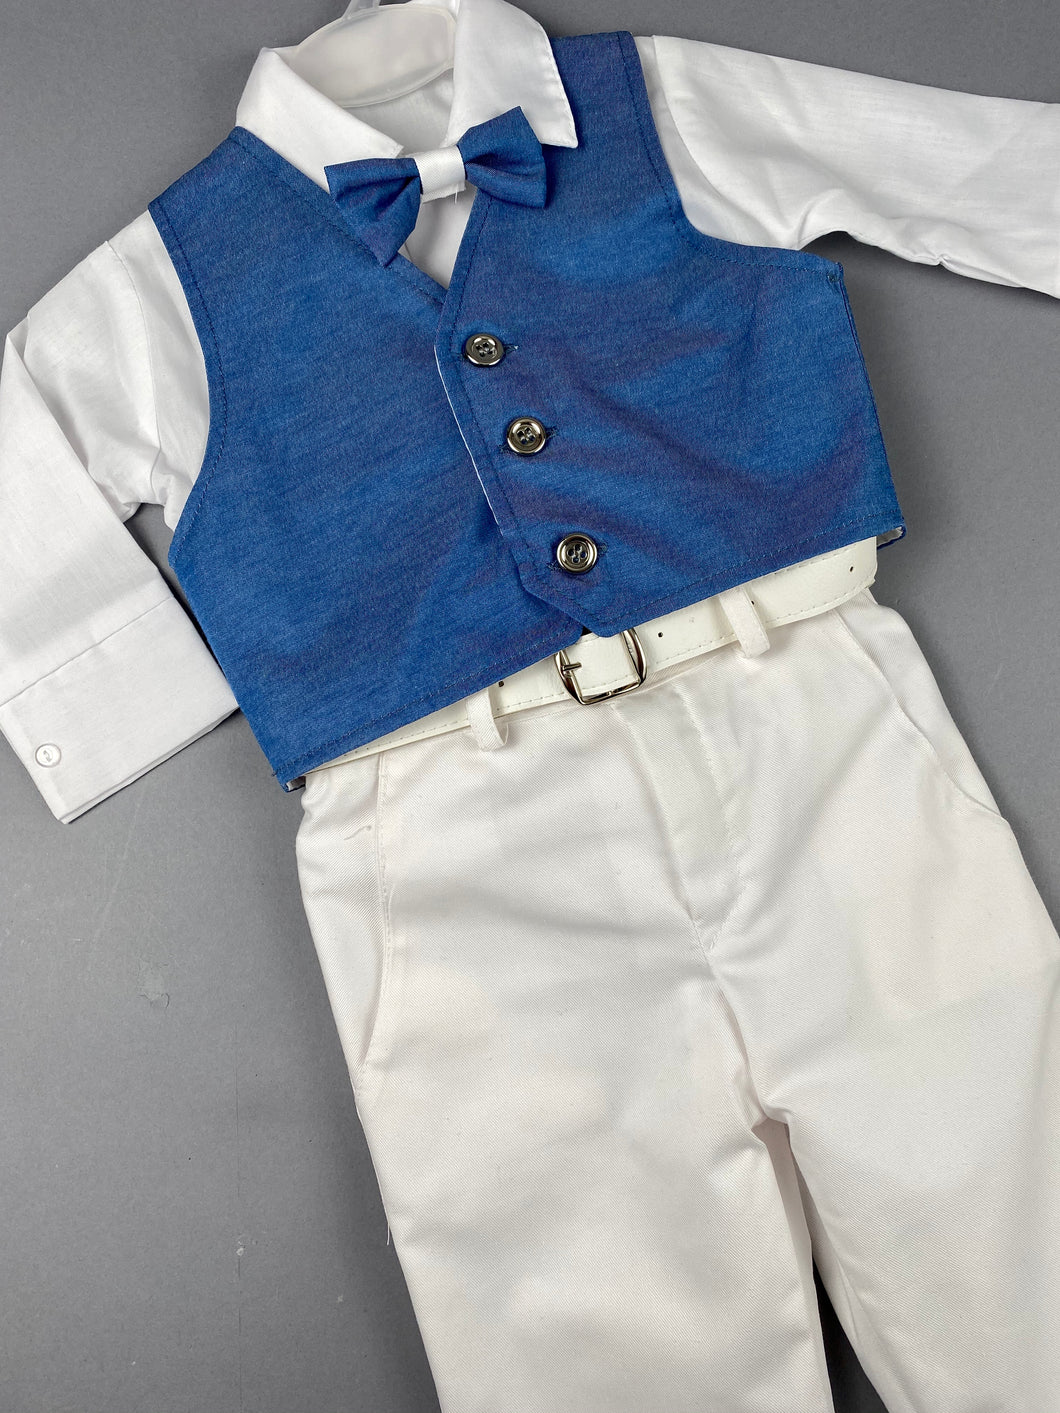 Rosies Collections 7pc full suit, Dress shirt With Cuff sleeves, Pants, Blue Jacket,  Blue Vest, Belt or Suspenders, Cap. Made in Greece exclusively for Rosies Collections S201916